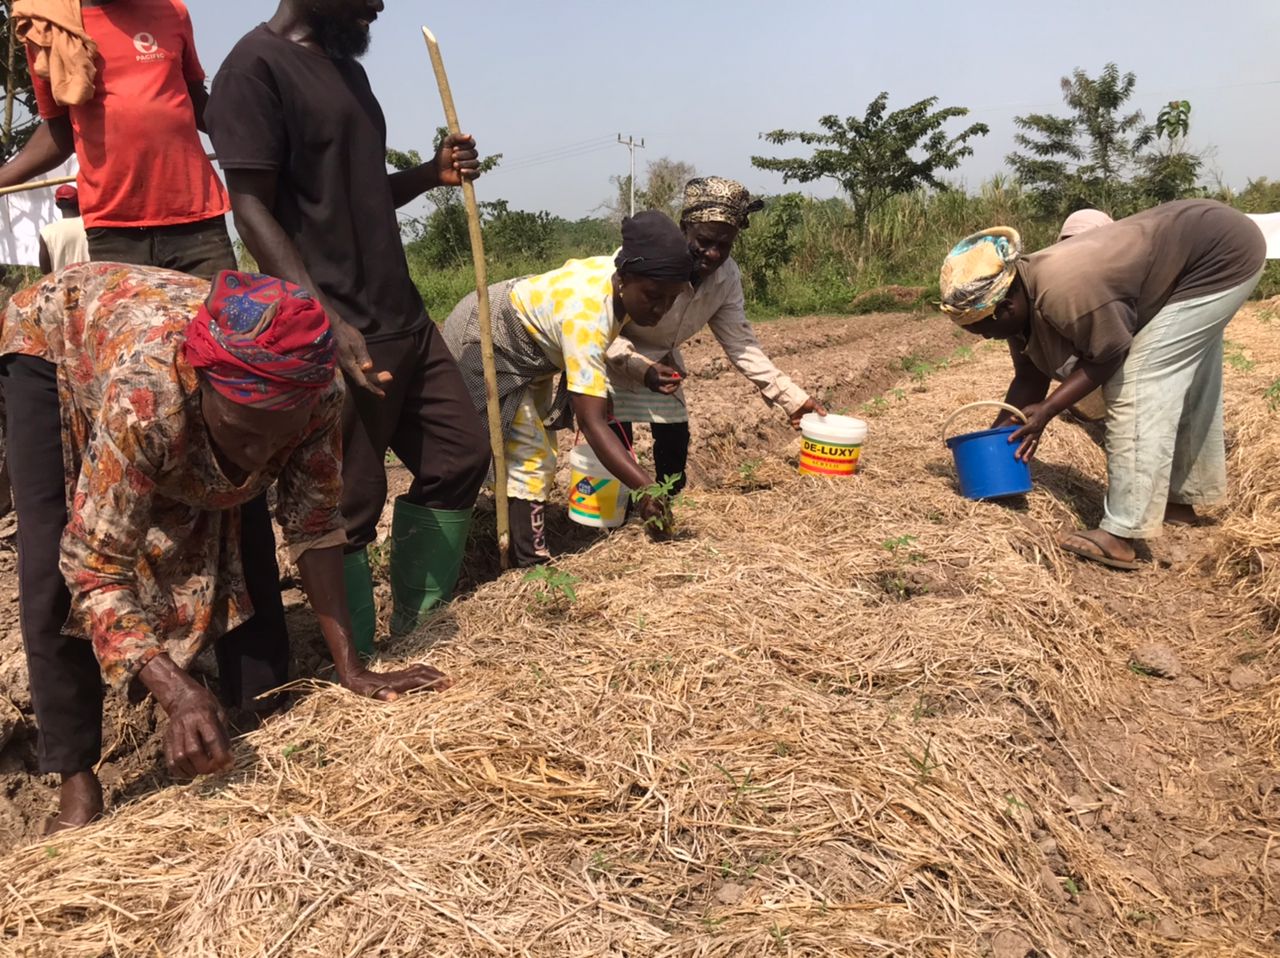 Farmers apply fertilization to a mulched bed during a practical training on crop fertilization.